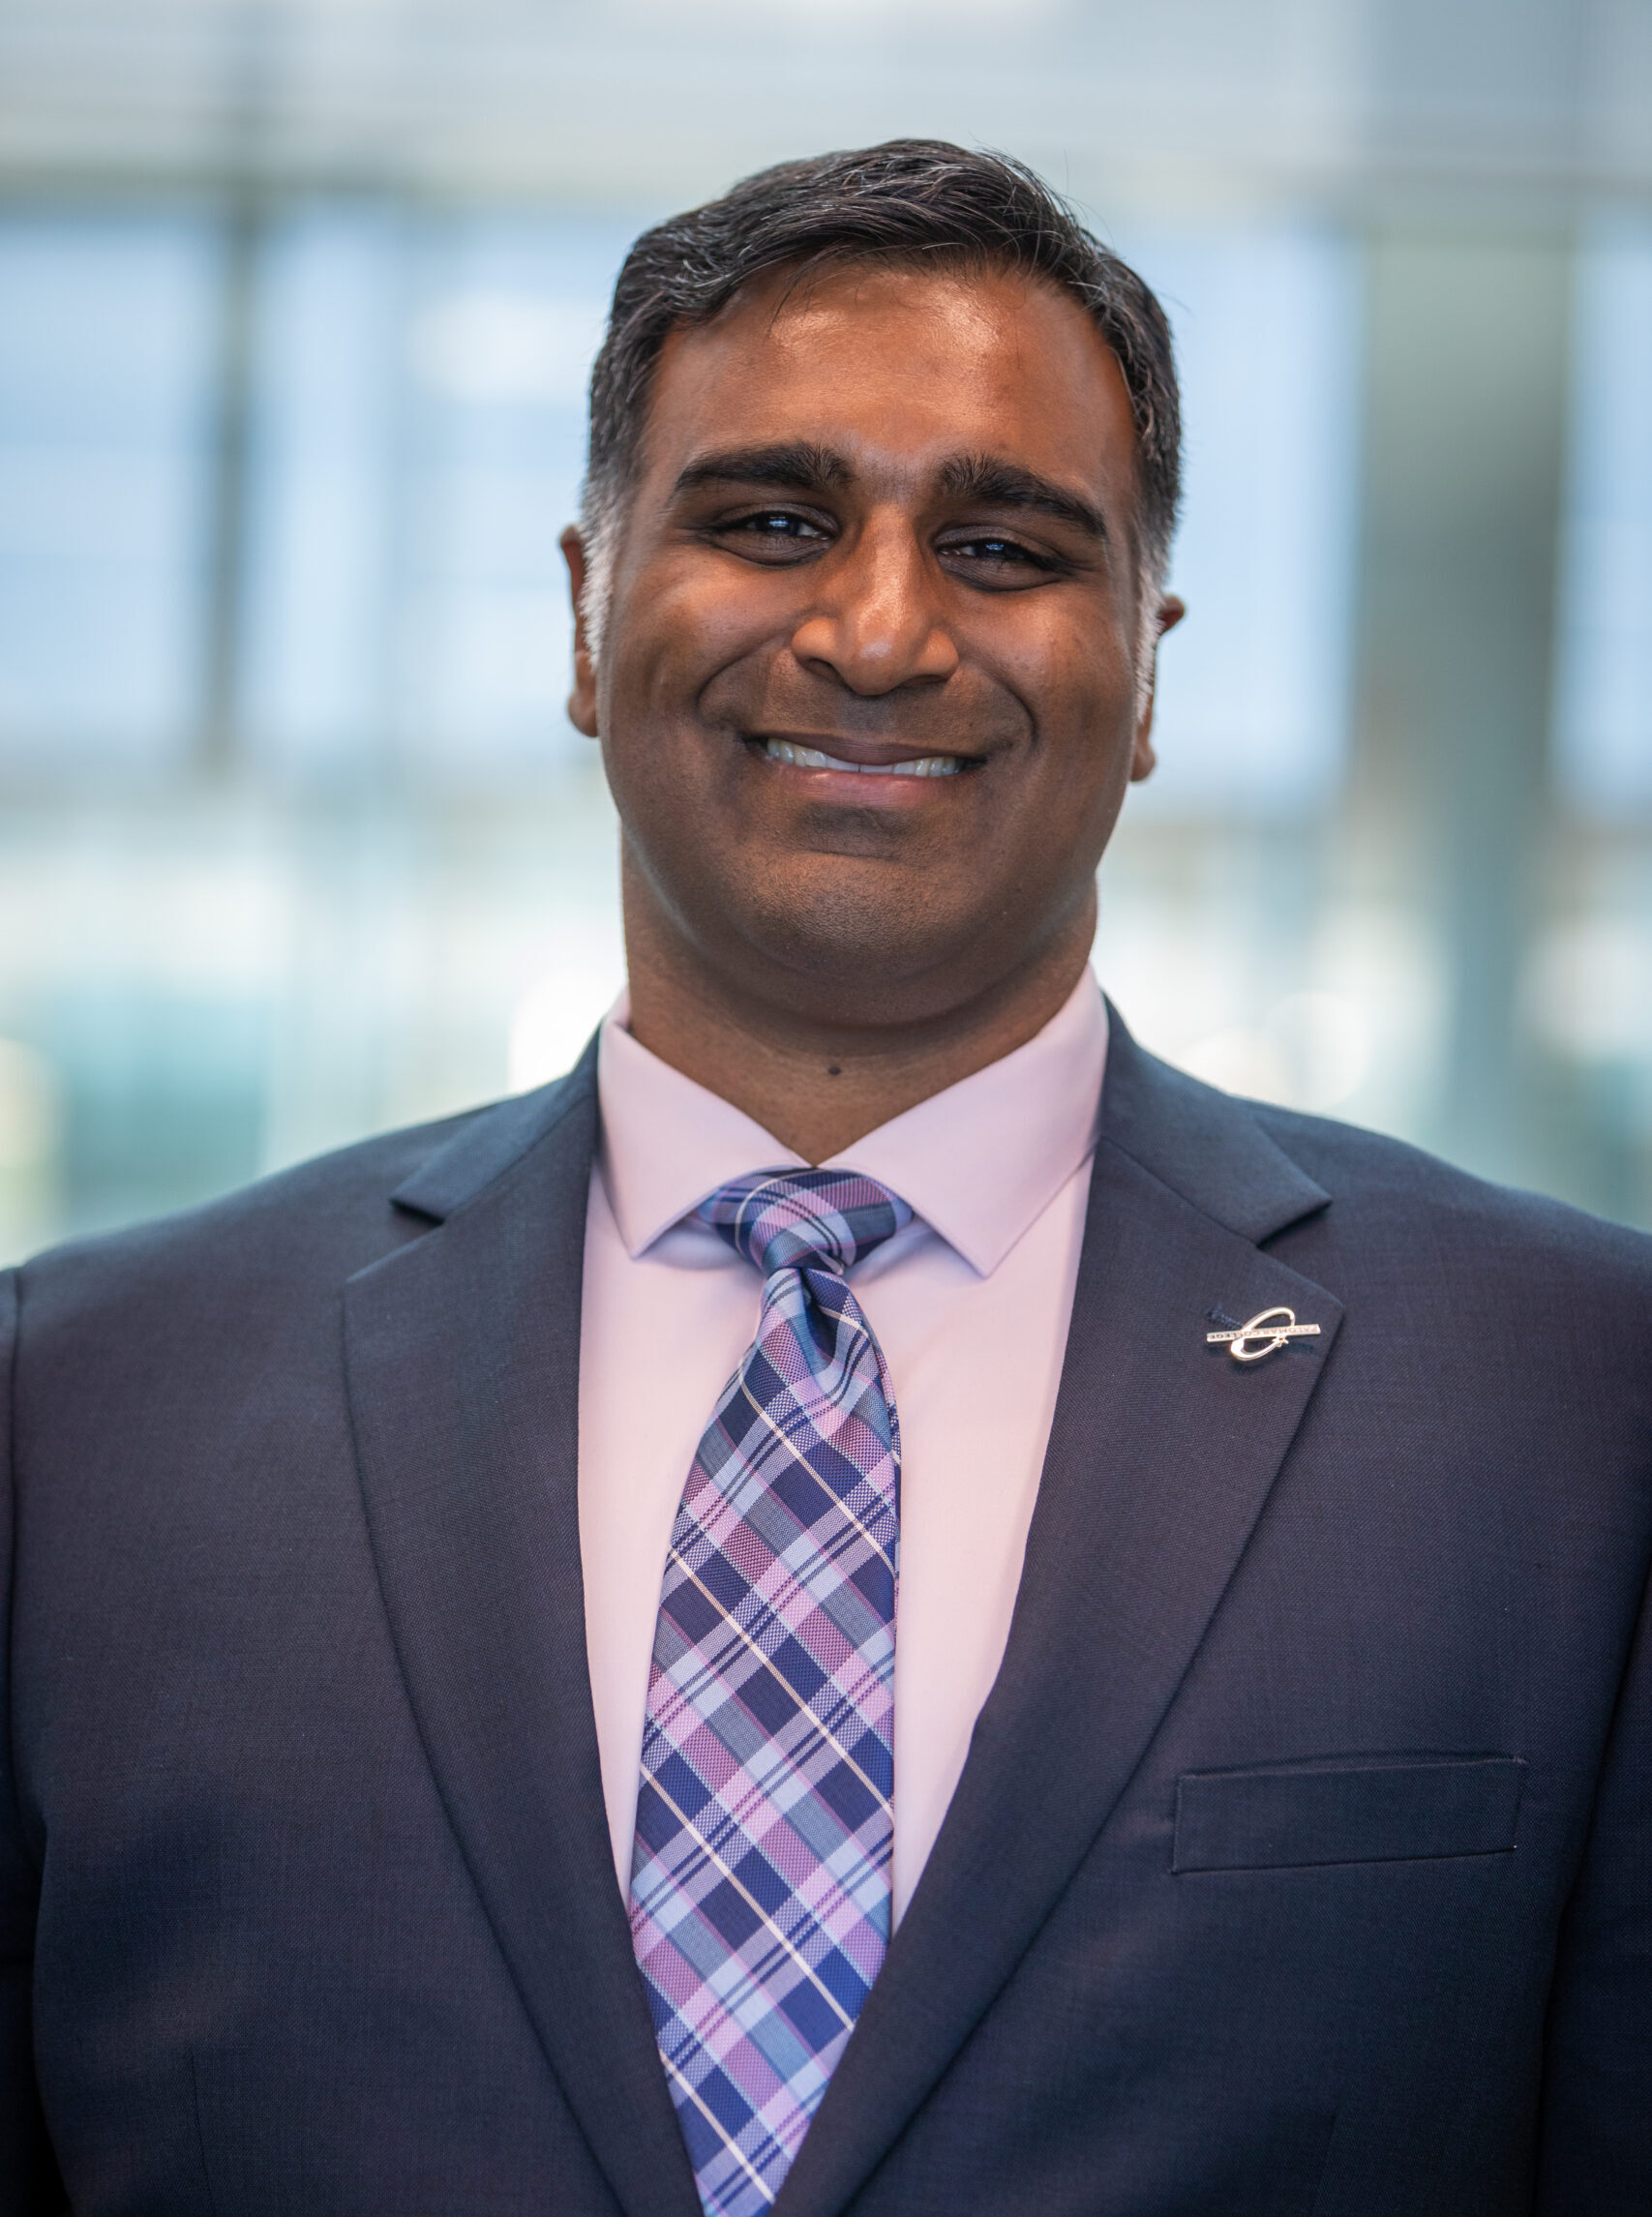 Kartik Raju is one of two candidates running to serve area 4, which covers all of Poway, Valley Center, Fallbrook, and Ramona. (Ryan Marlowe/The Telescope)